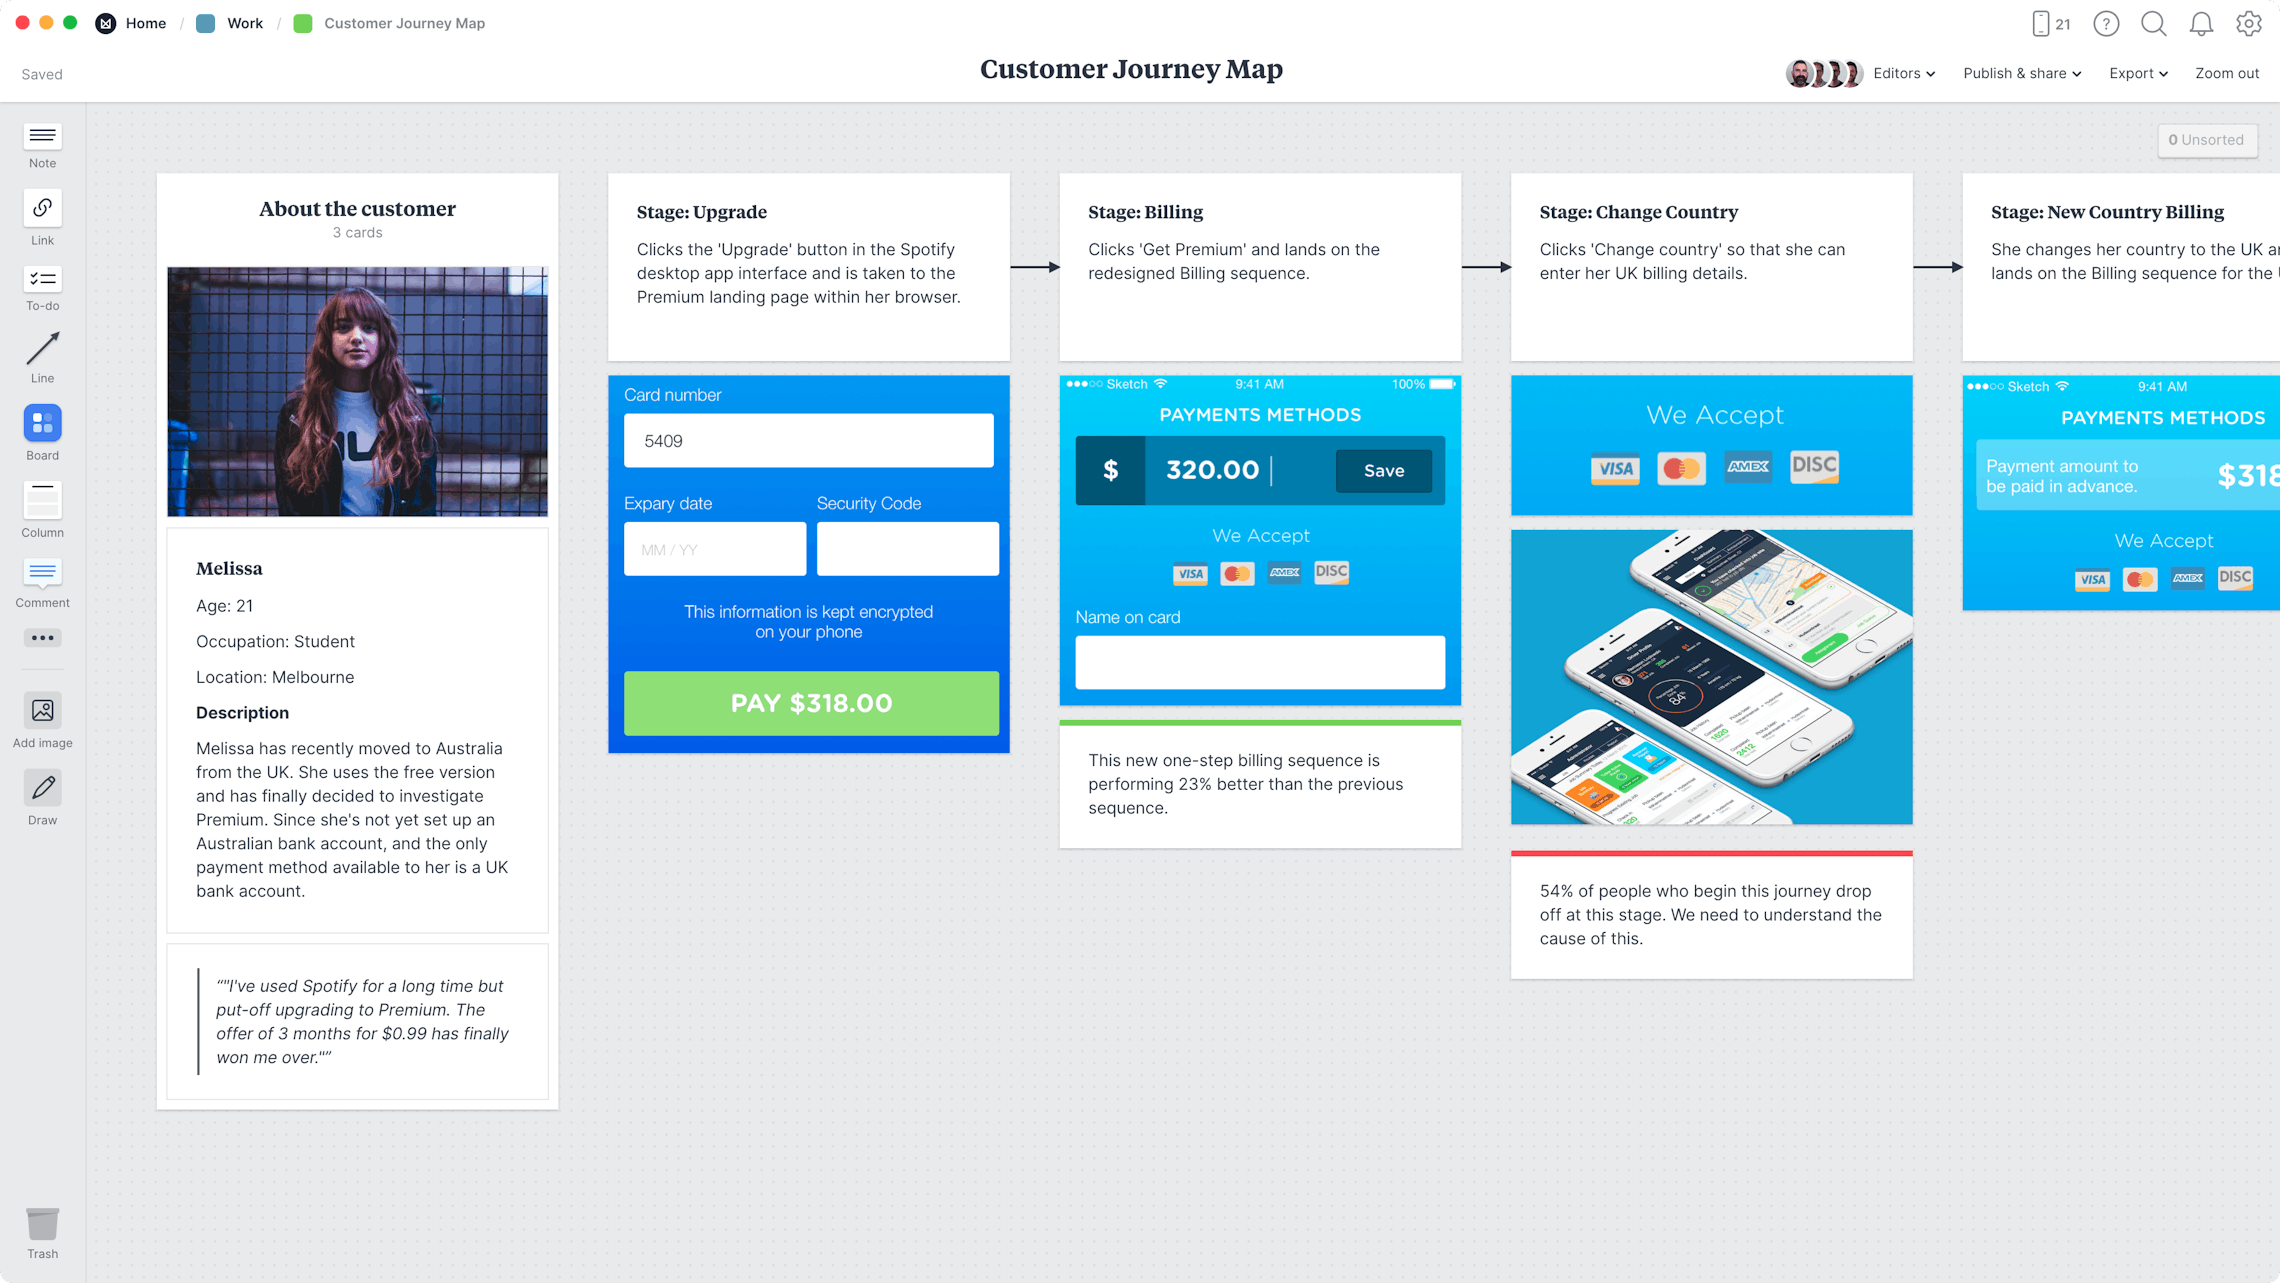 Customer Journey Map Template, within the Milanote app